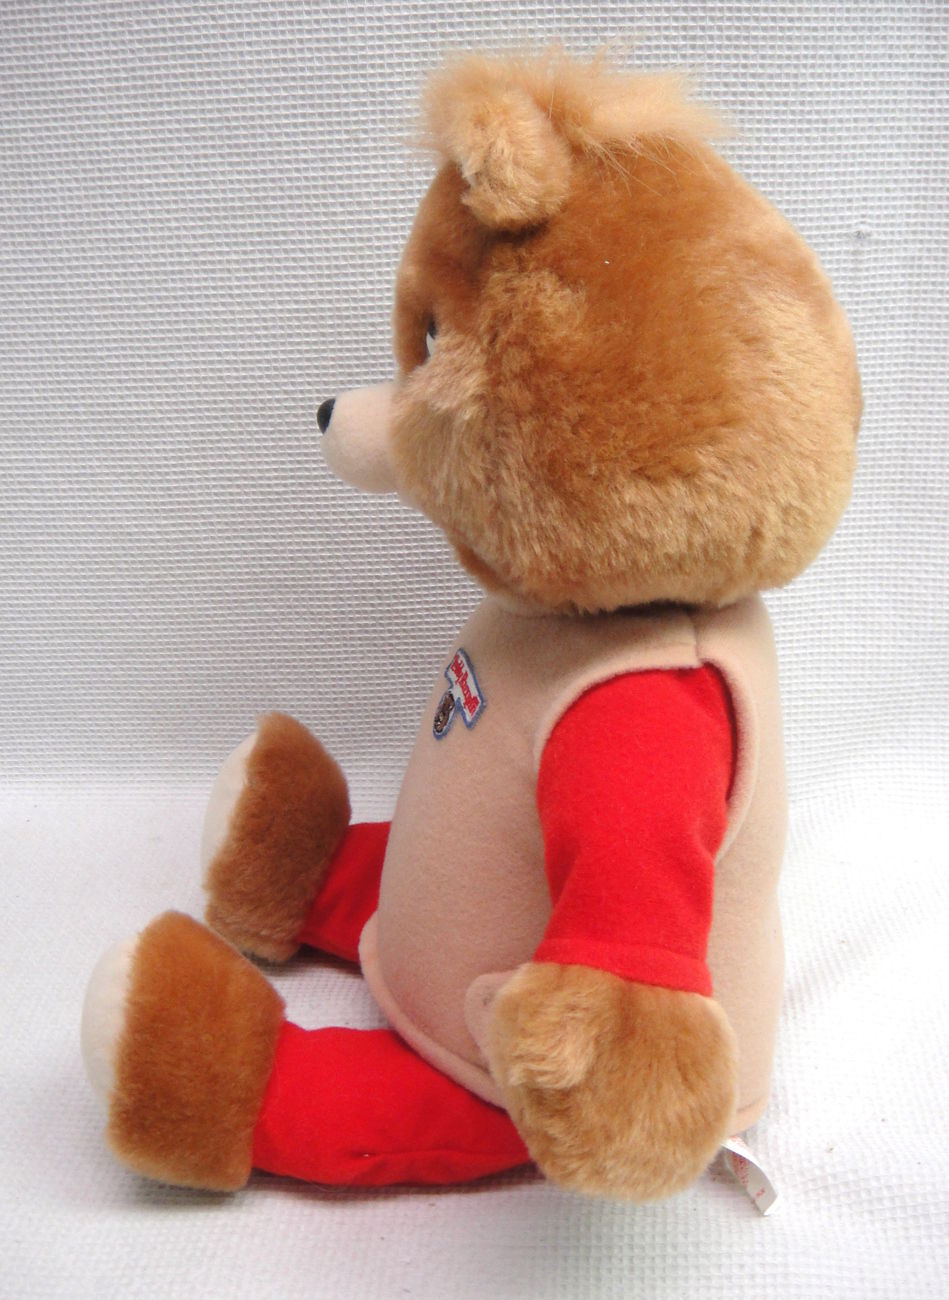 The World of Teddy Ruxpin by Worlds of Wonder Co. - The Old Robot's Web Site